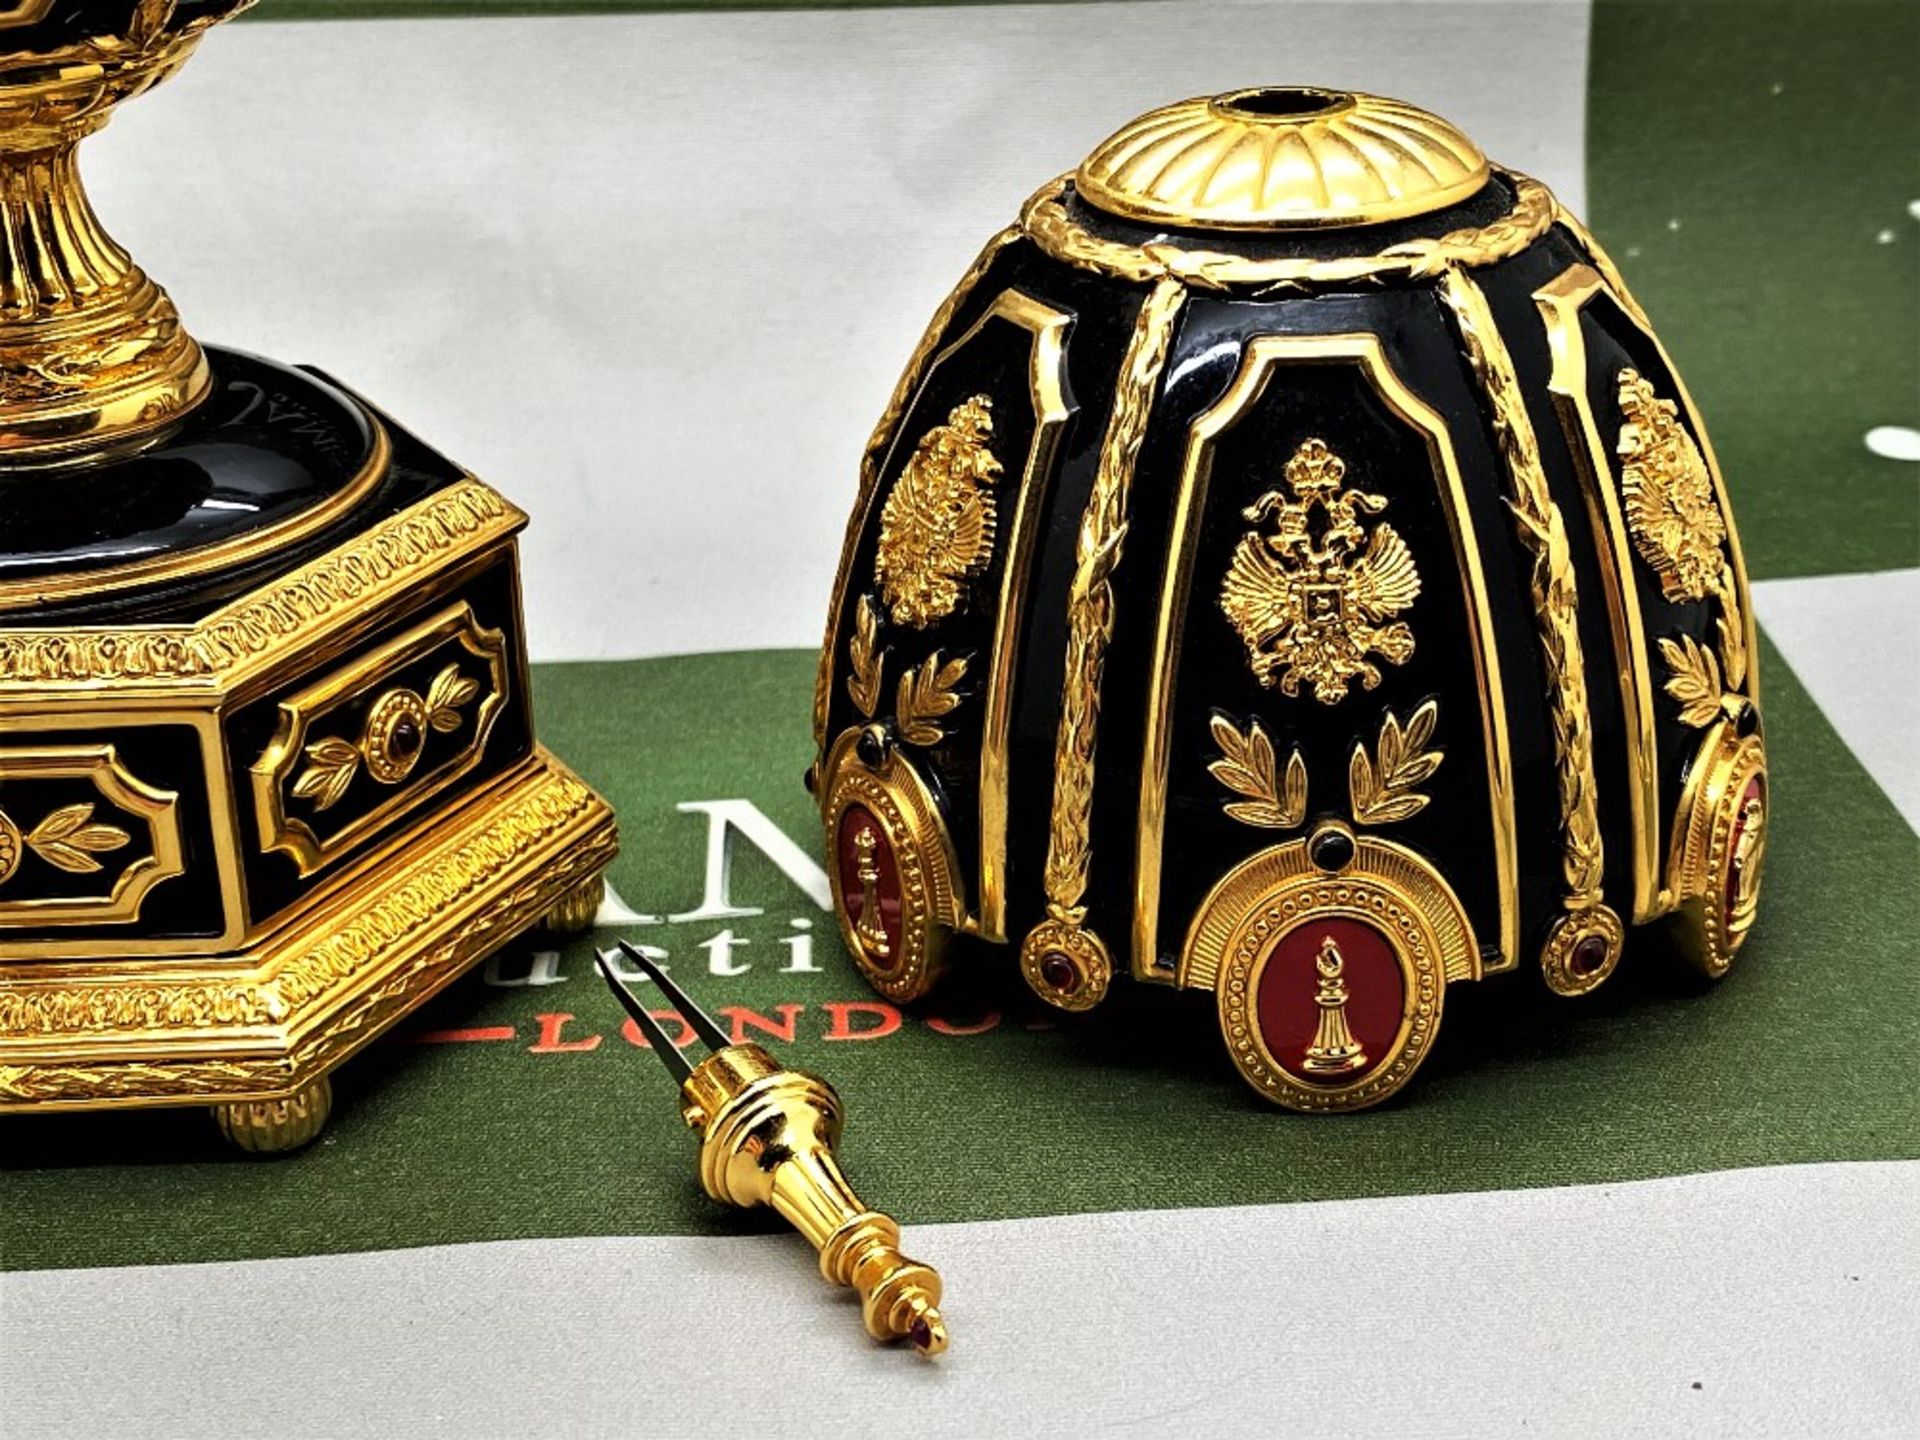 Faberge 24 Ct Gold- The Imperial Jeweled Egg Chess Set - Image 6 of 6